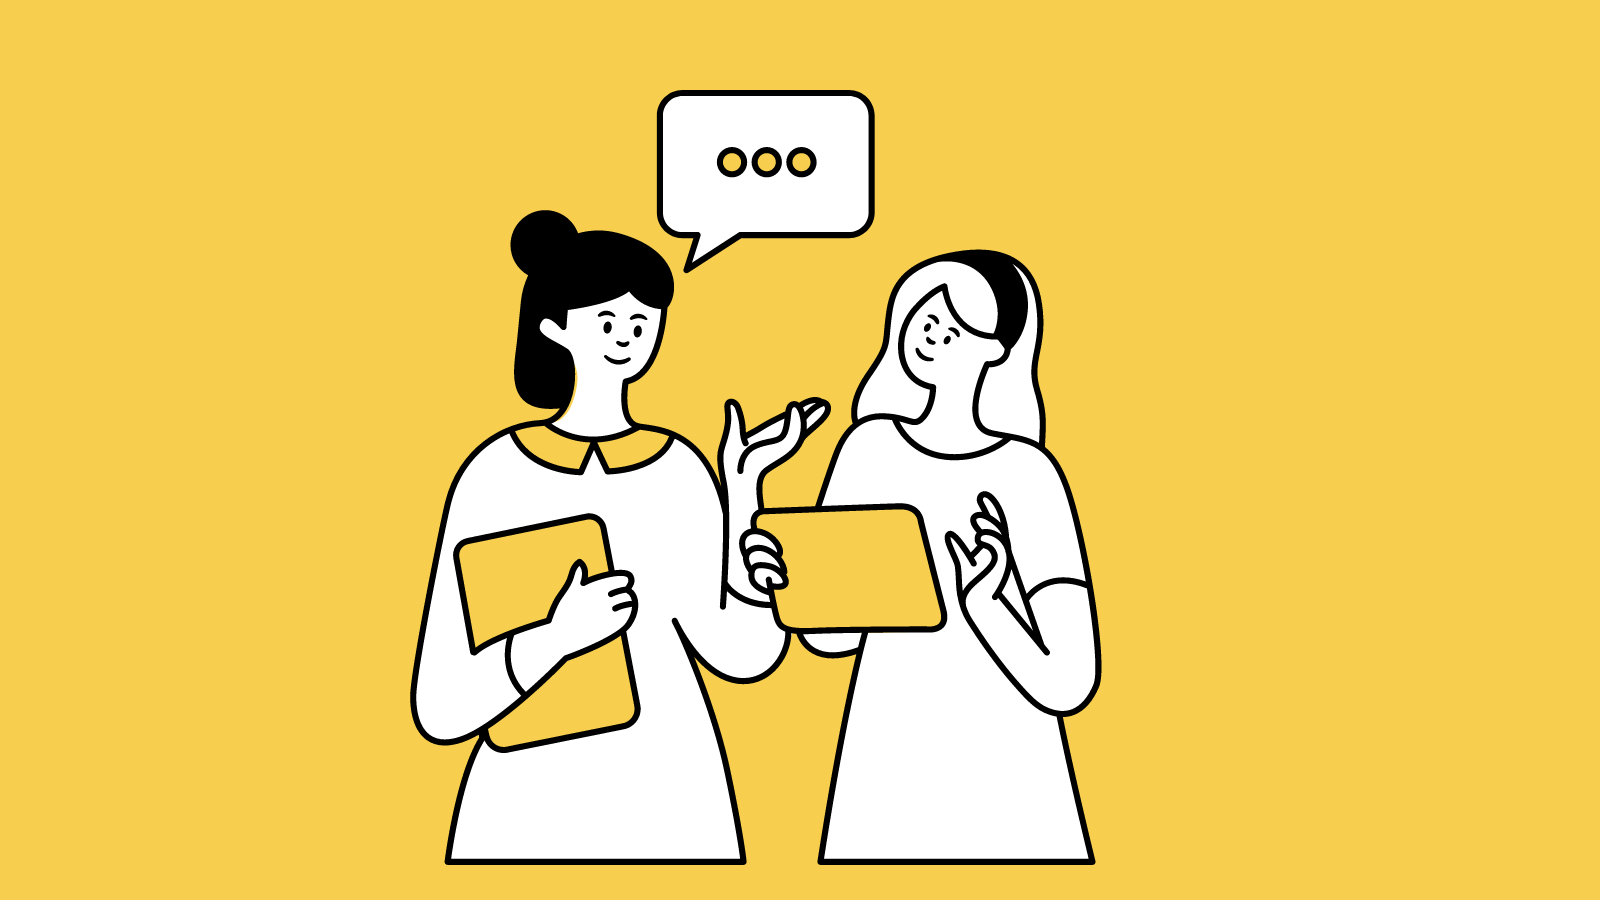 Two women holding clipboards in conversation